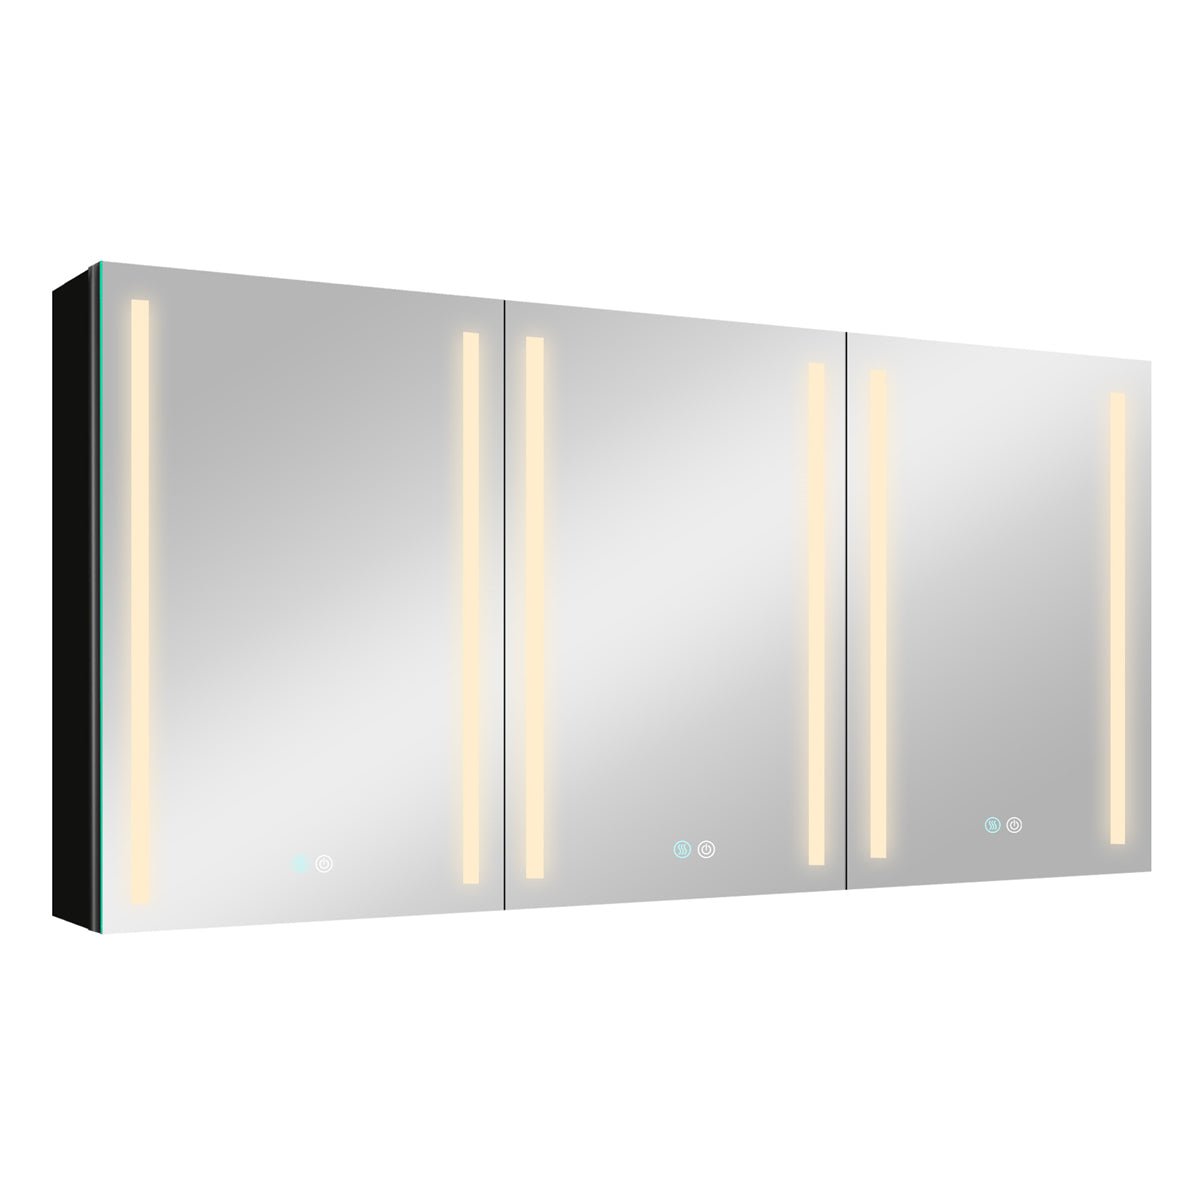 ExBrite 60 in. W x 30 in. H Bathroom Medicine Cabinet with Lighted Mirror, Surface Mount ,Stepless Dimming